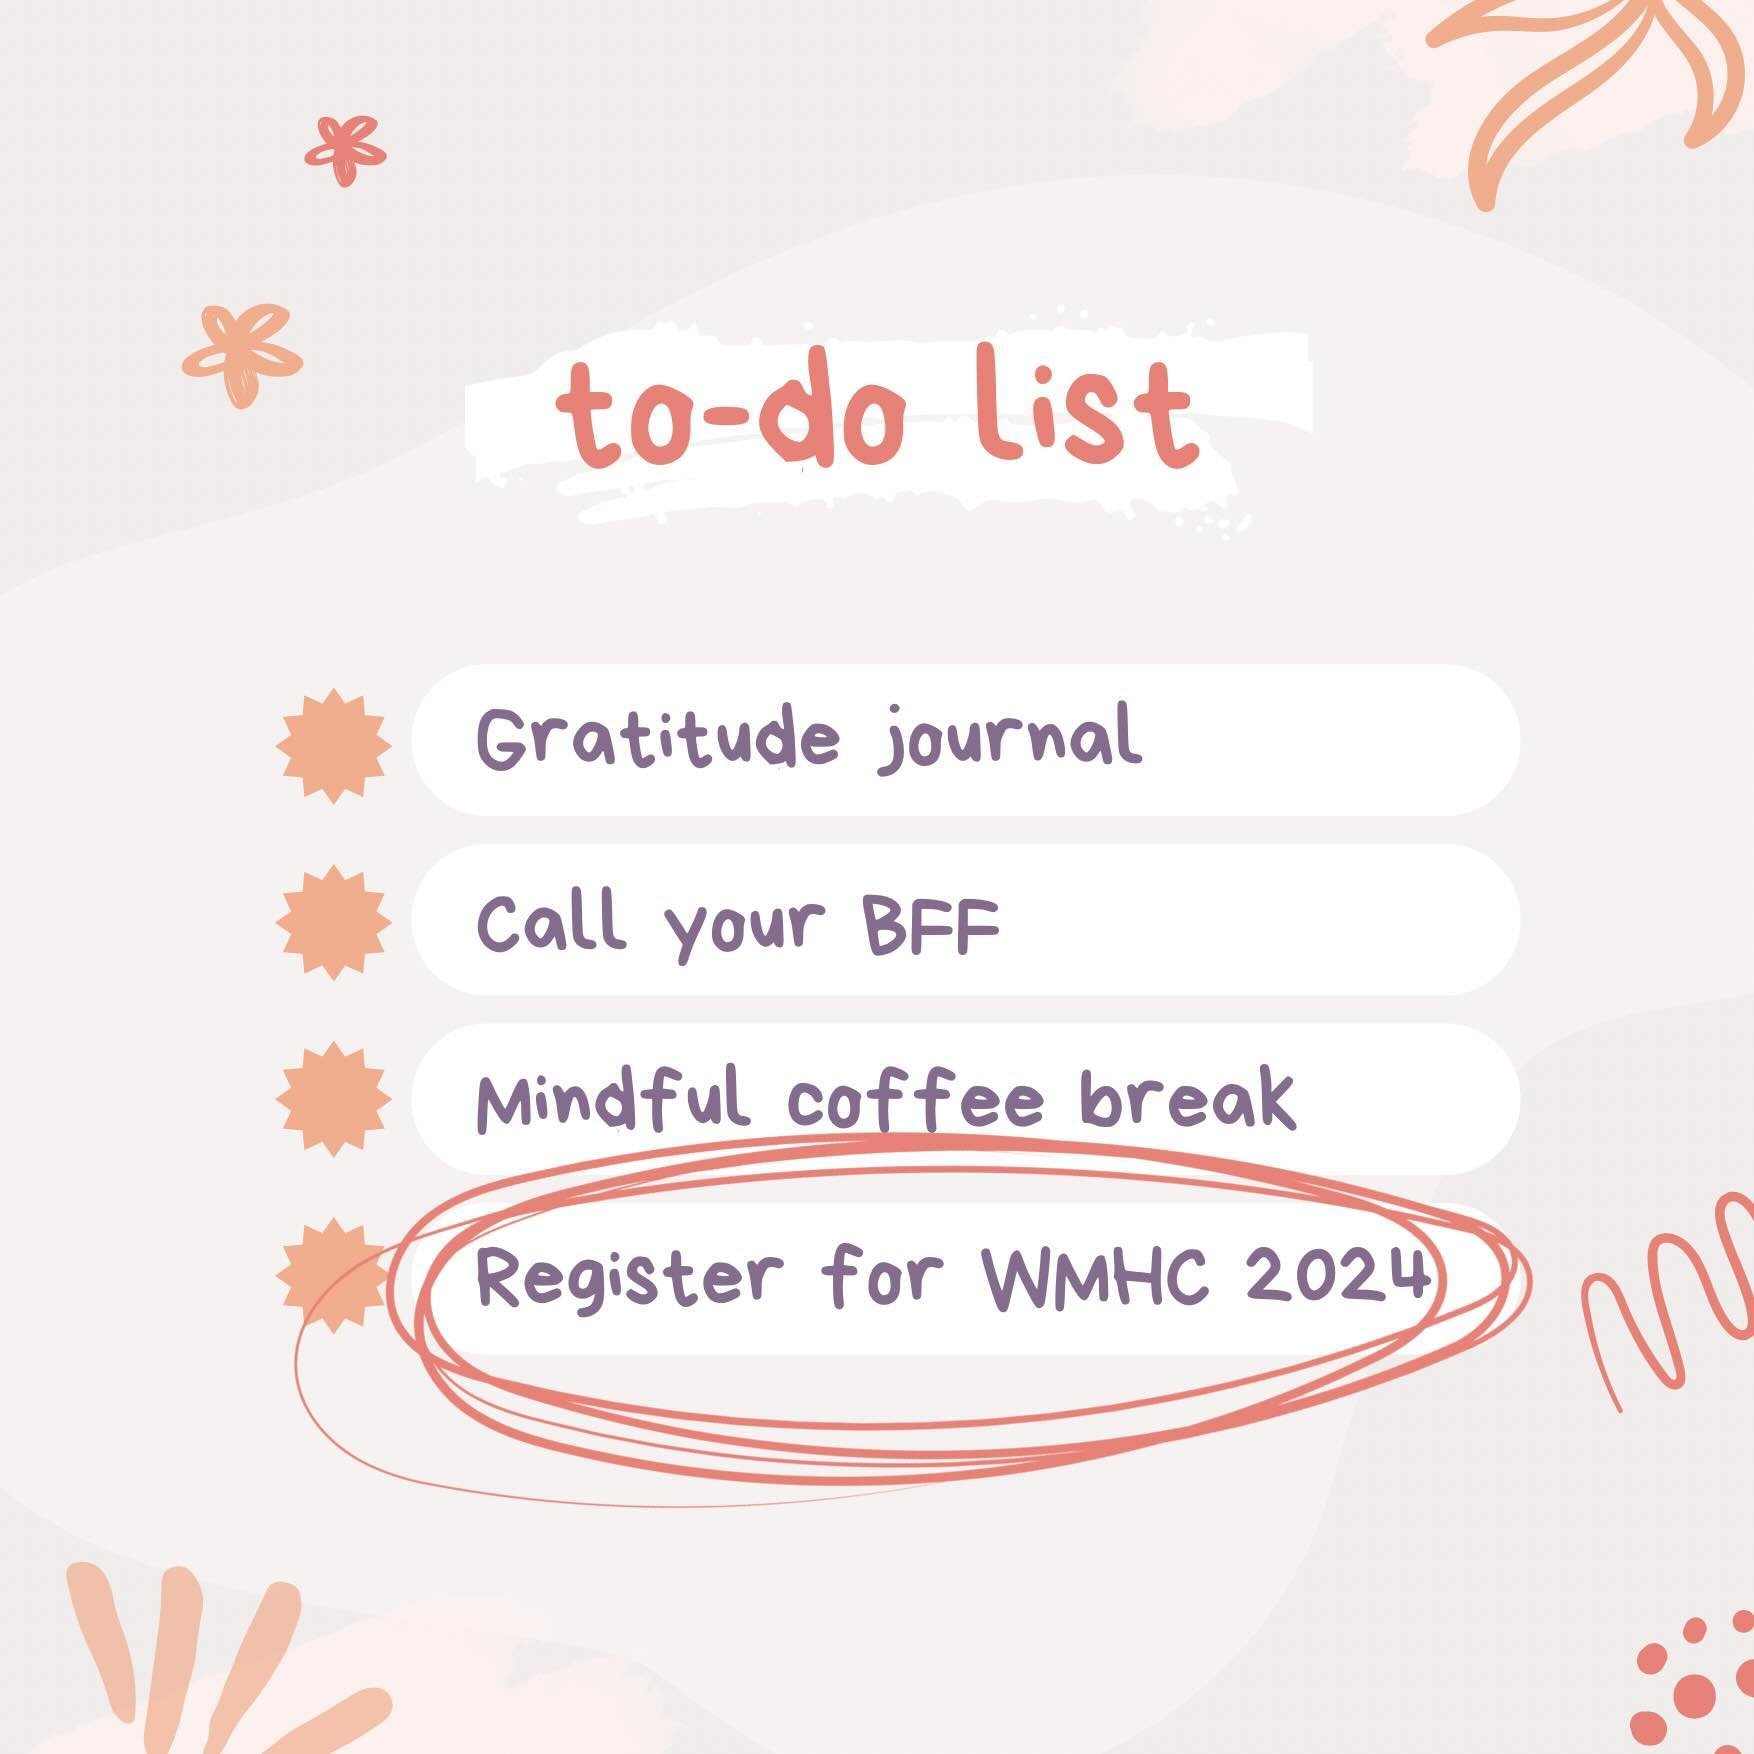 Working on that to-do list? Don&rsquo;t forget to register for #WMHC2024! We are just under a month out, so make sure to secure your spot. Registration is free but required to access our full lineup!

Click through #linkinbio or visit our website for